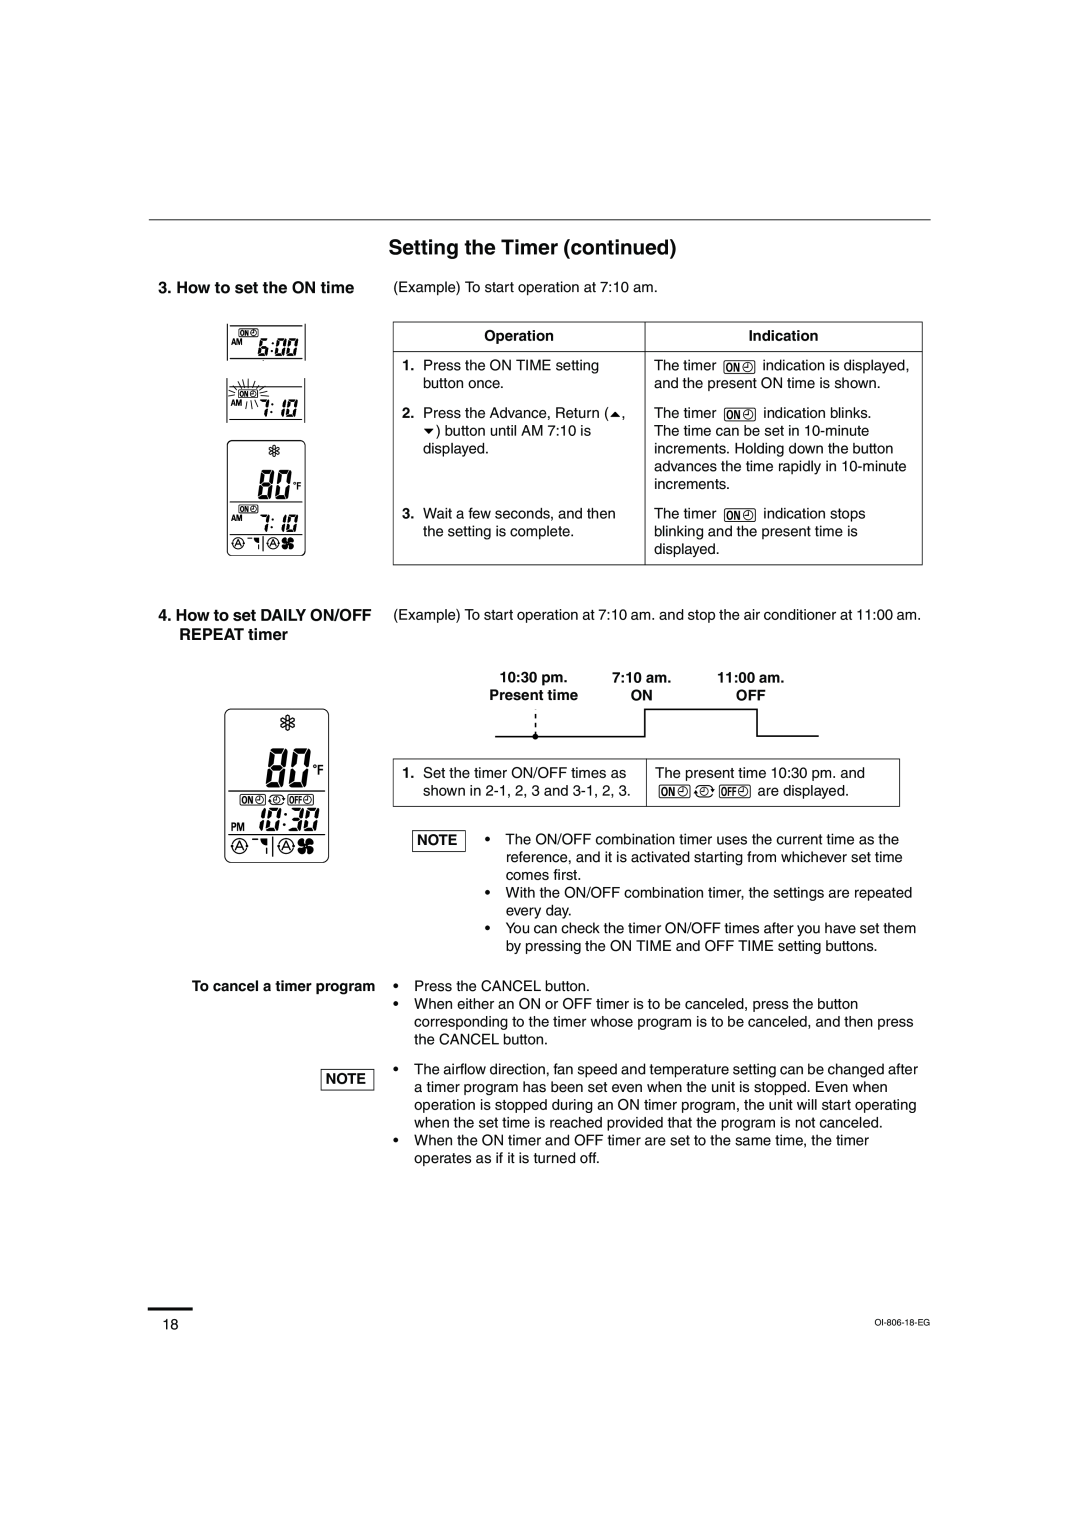 Sanyo KMS0972, KMS1272 instruction manual Setting the Timer continued, REPEAT timer 